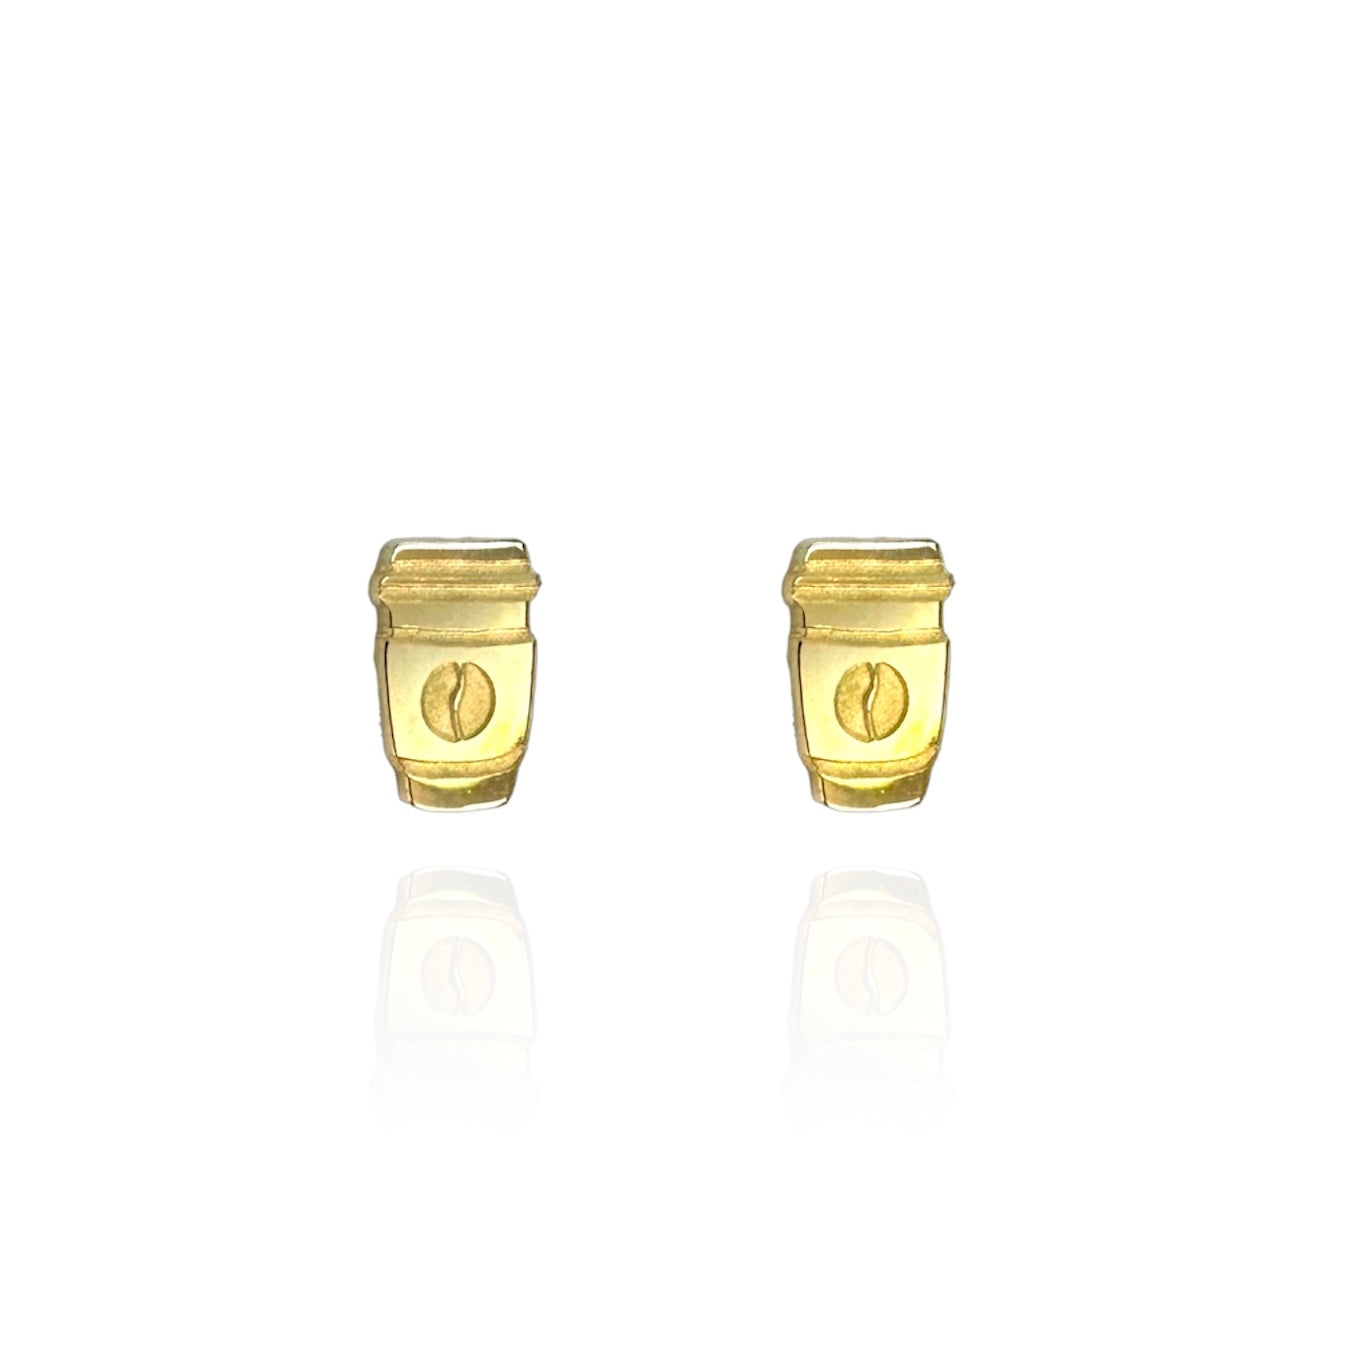 Coffee Bean Cup Earring Studs Gold